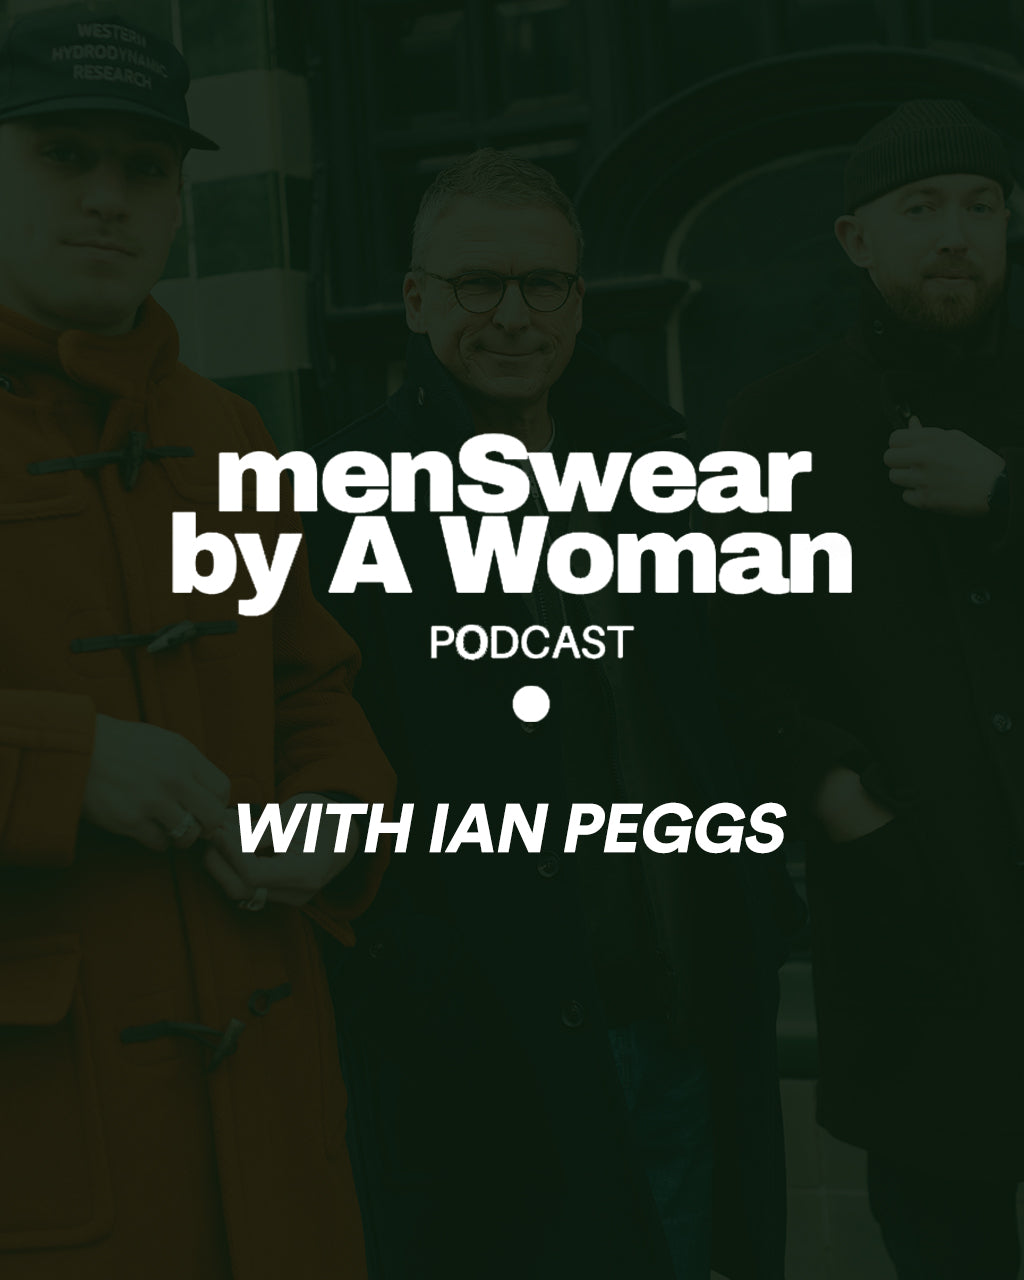 MENSWEAR BY A WOMAN PODCAST